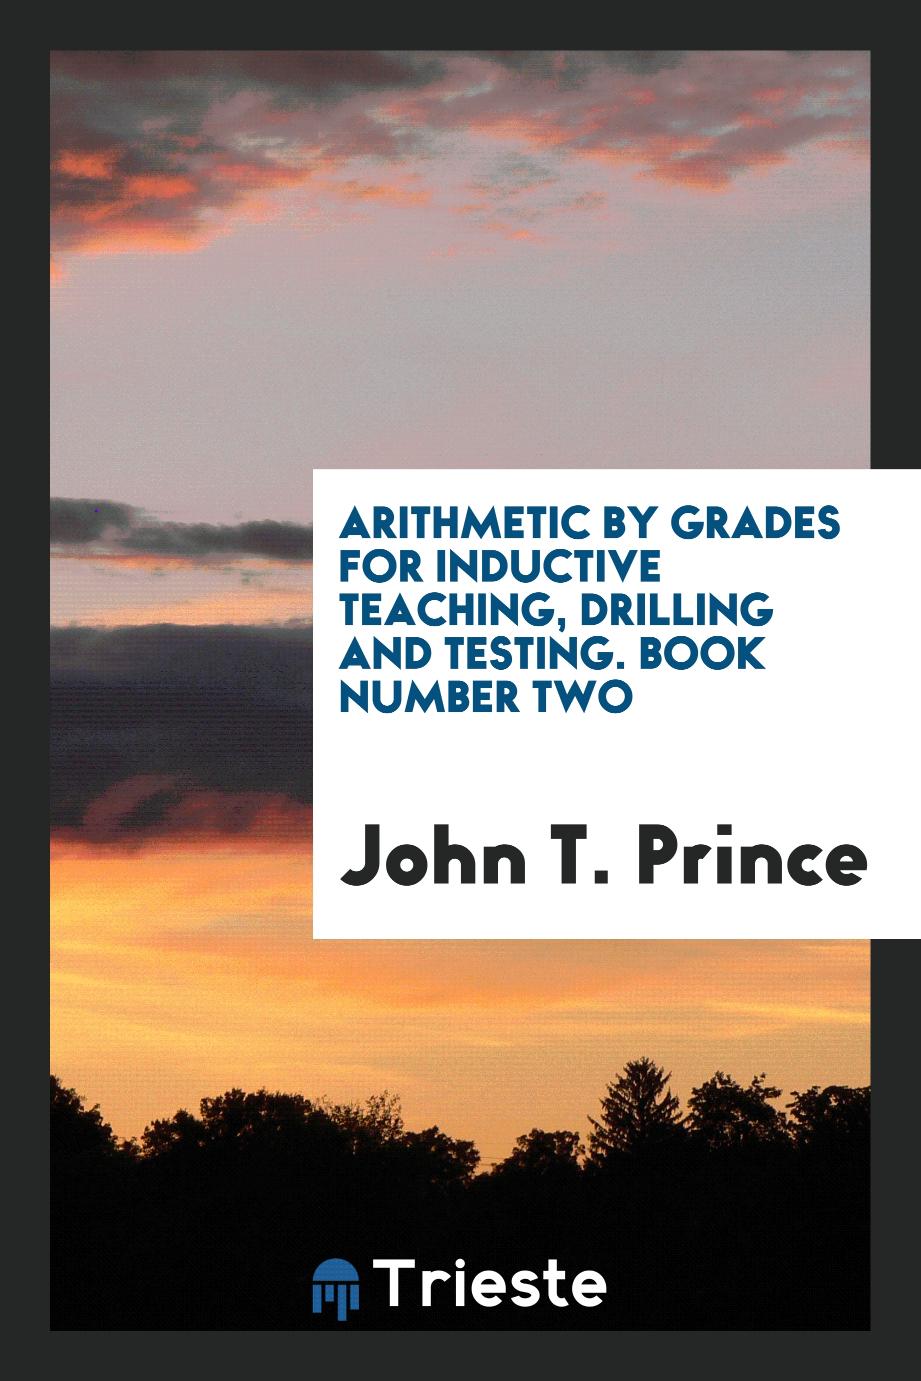 Arithmetic by Grades for Inductive Teaching, Drilling and Testing. Book Number Two